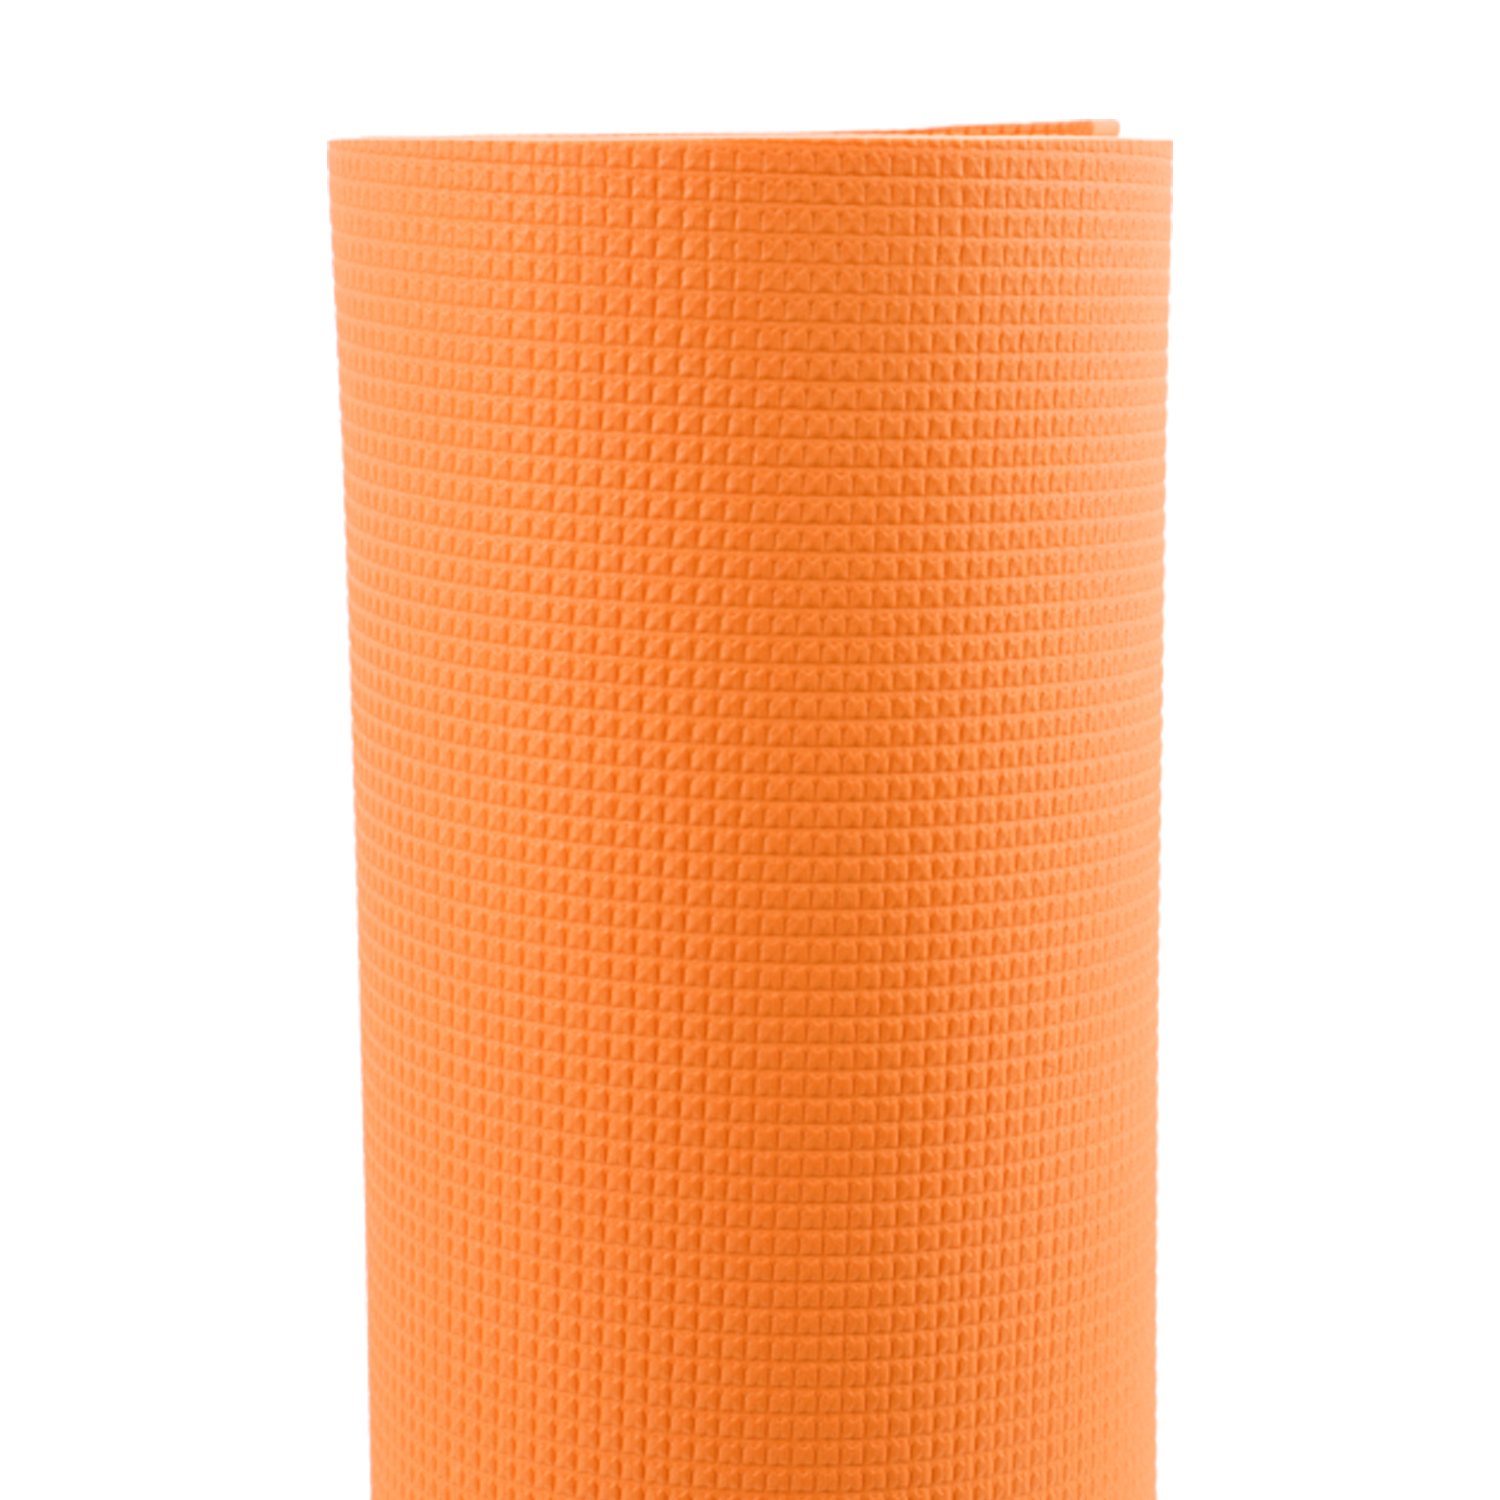 Steelbird Yoga Mat 6mm For Men And Women 6x2 Feet Wide Extra Thick Exercise Mat For Workout,Yoga,Fitness, Gym Non-Slip Light Weight Mat With Rope